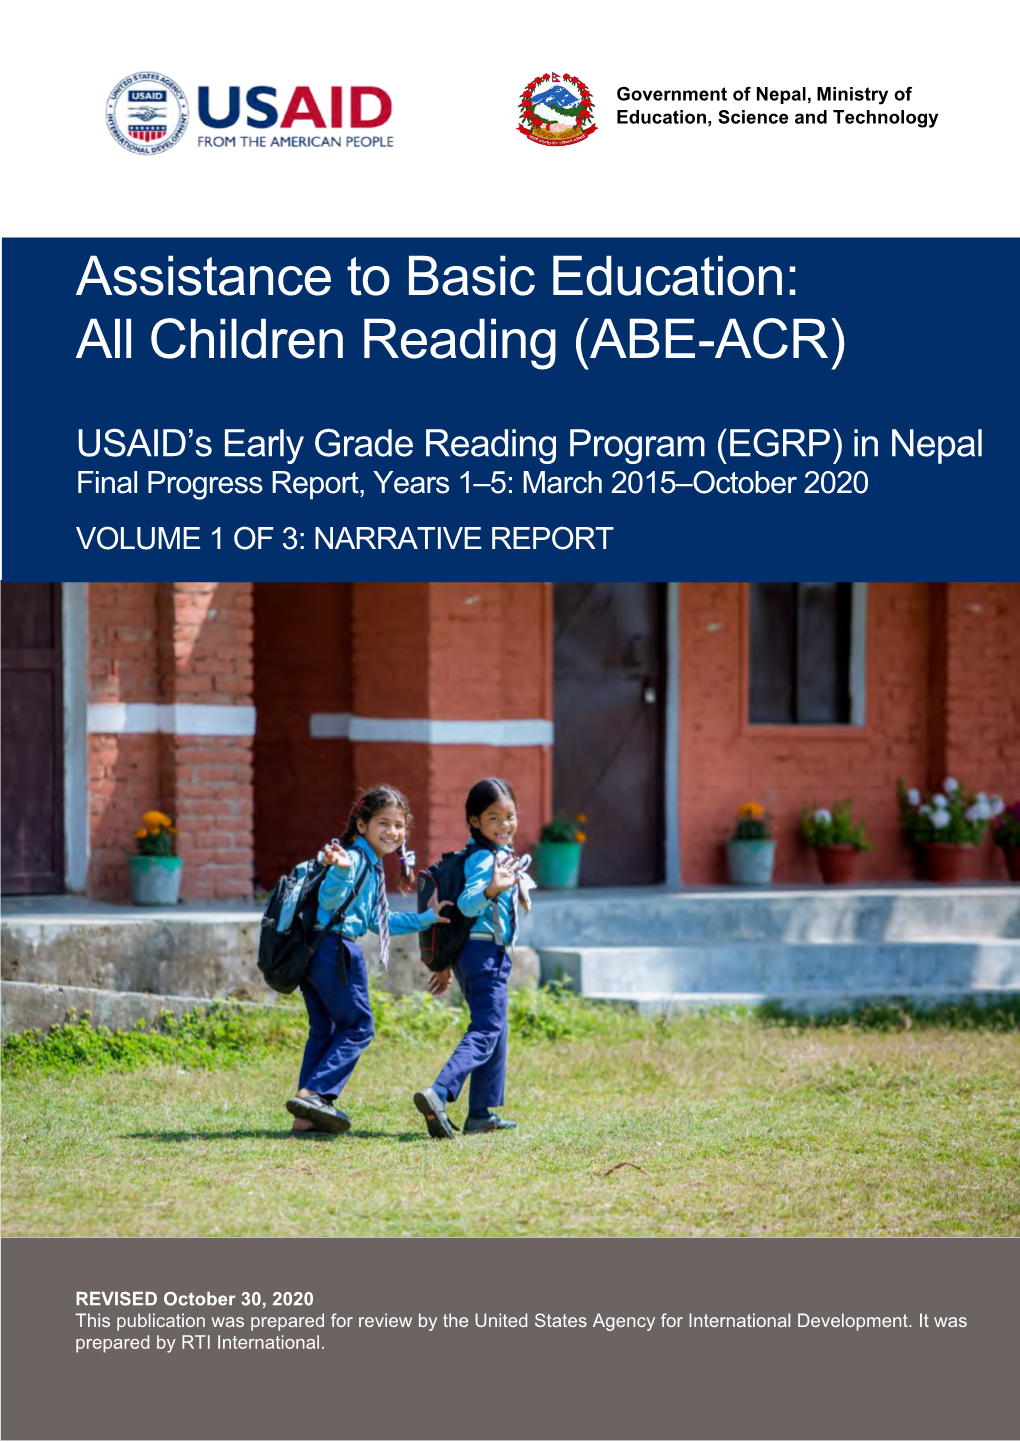 USAID's Early Grade Reading Program (EGRP) in Nepal